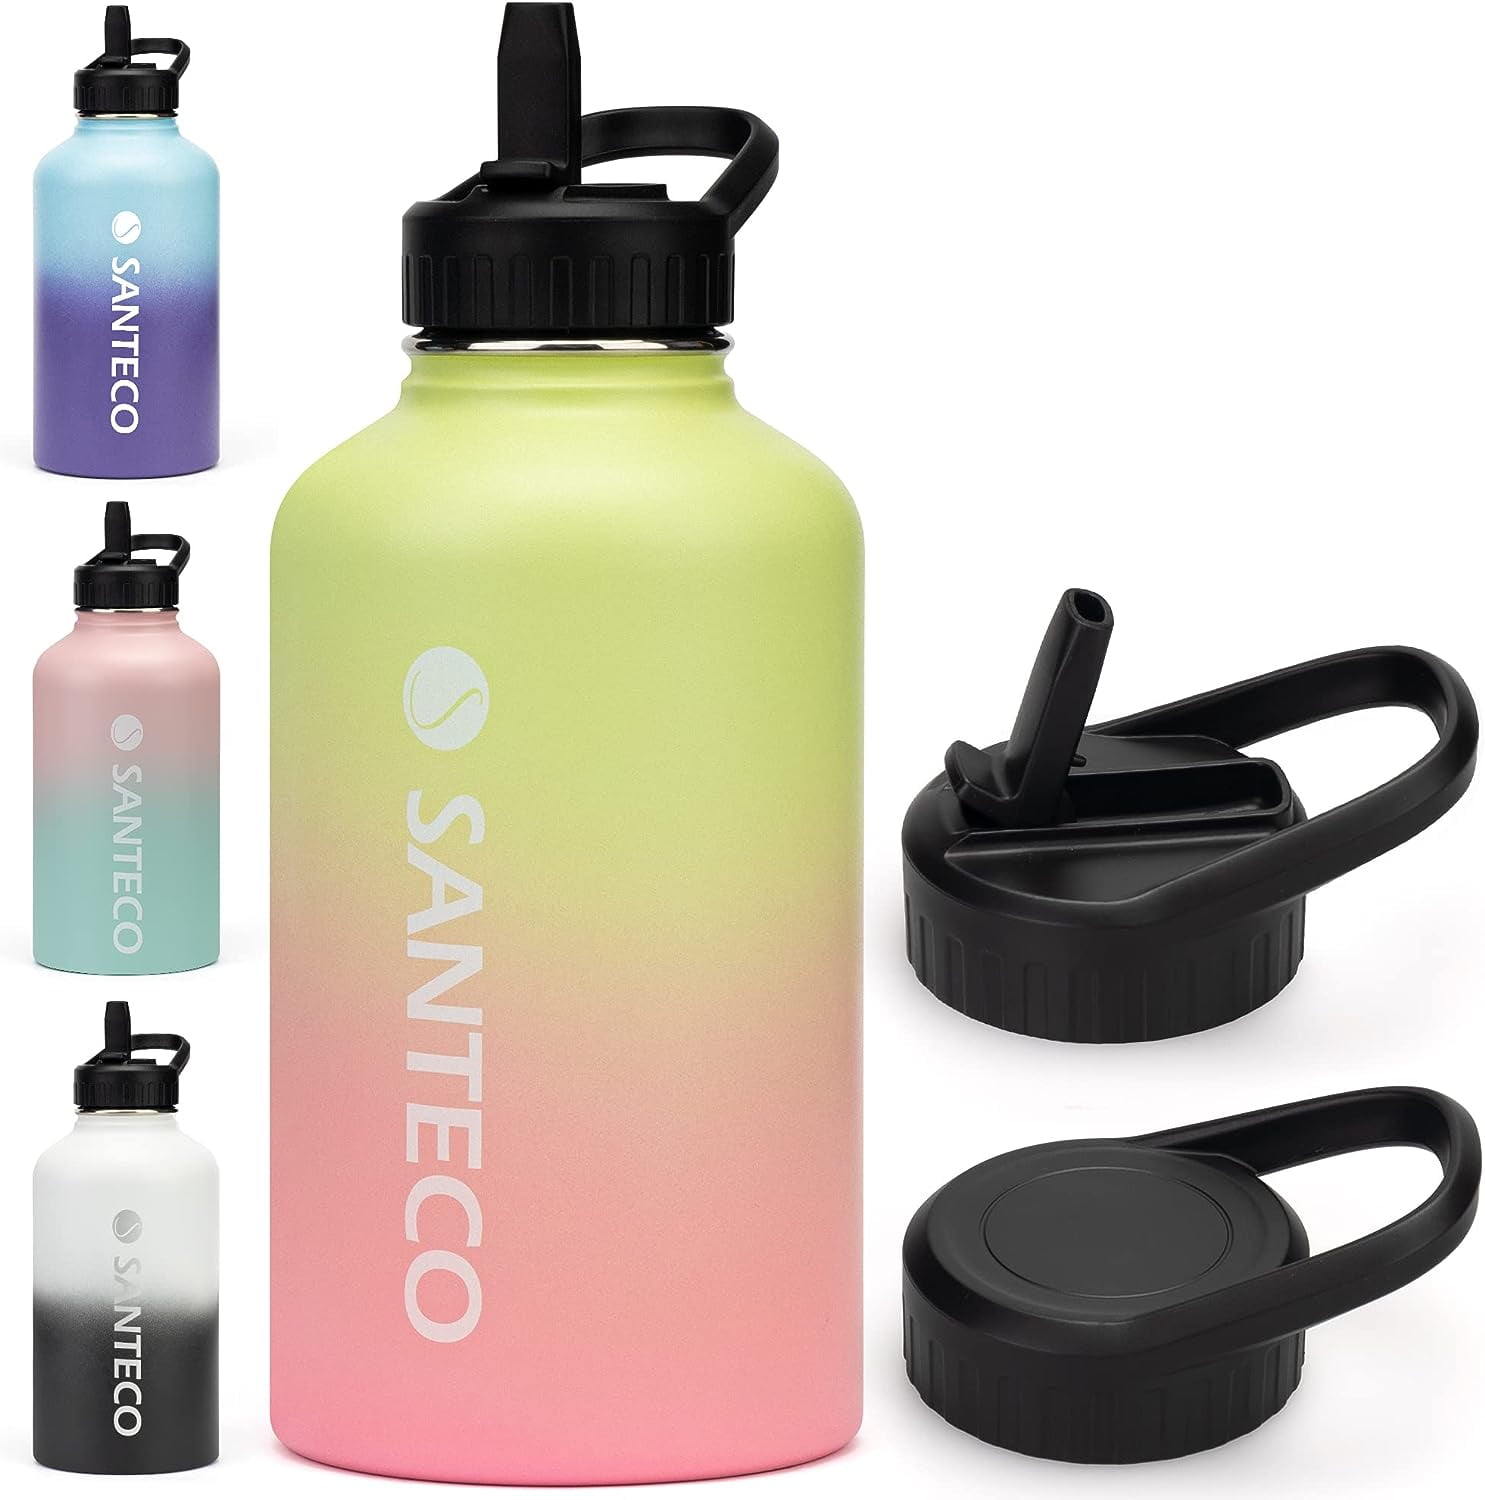 Half-gallon Insulated Water-Bottle with Straw - Stainless Steel